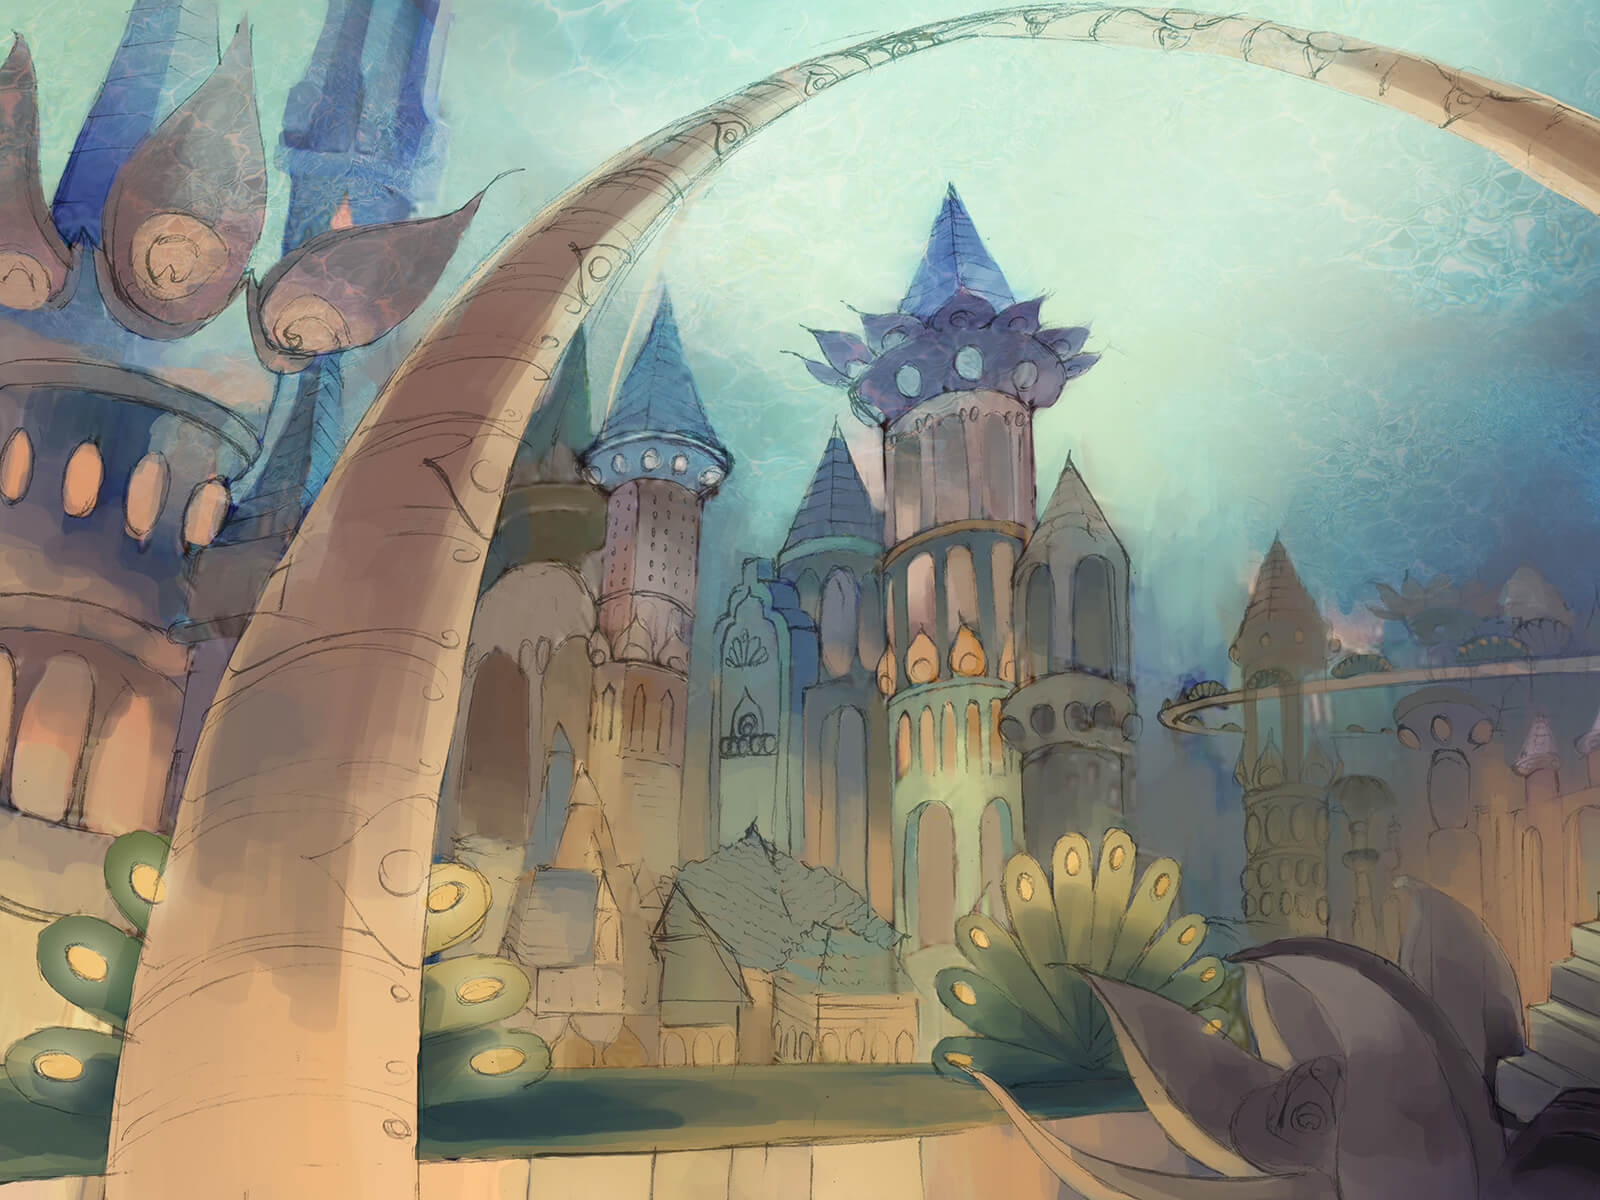 Two views of an underwater city colored in muted pastel tones, full of towers, arches, and massive, ornate buildings.